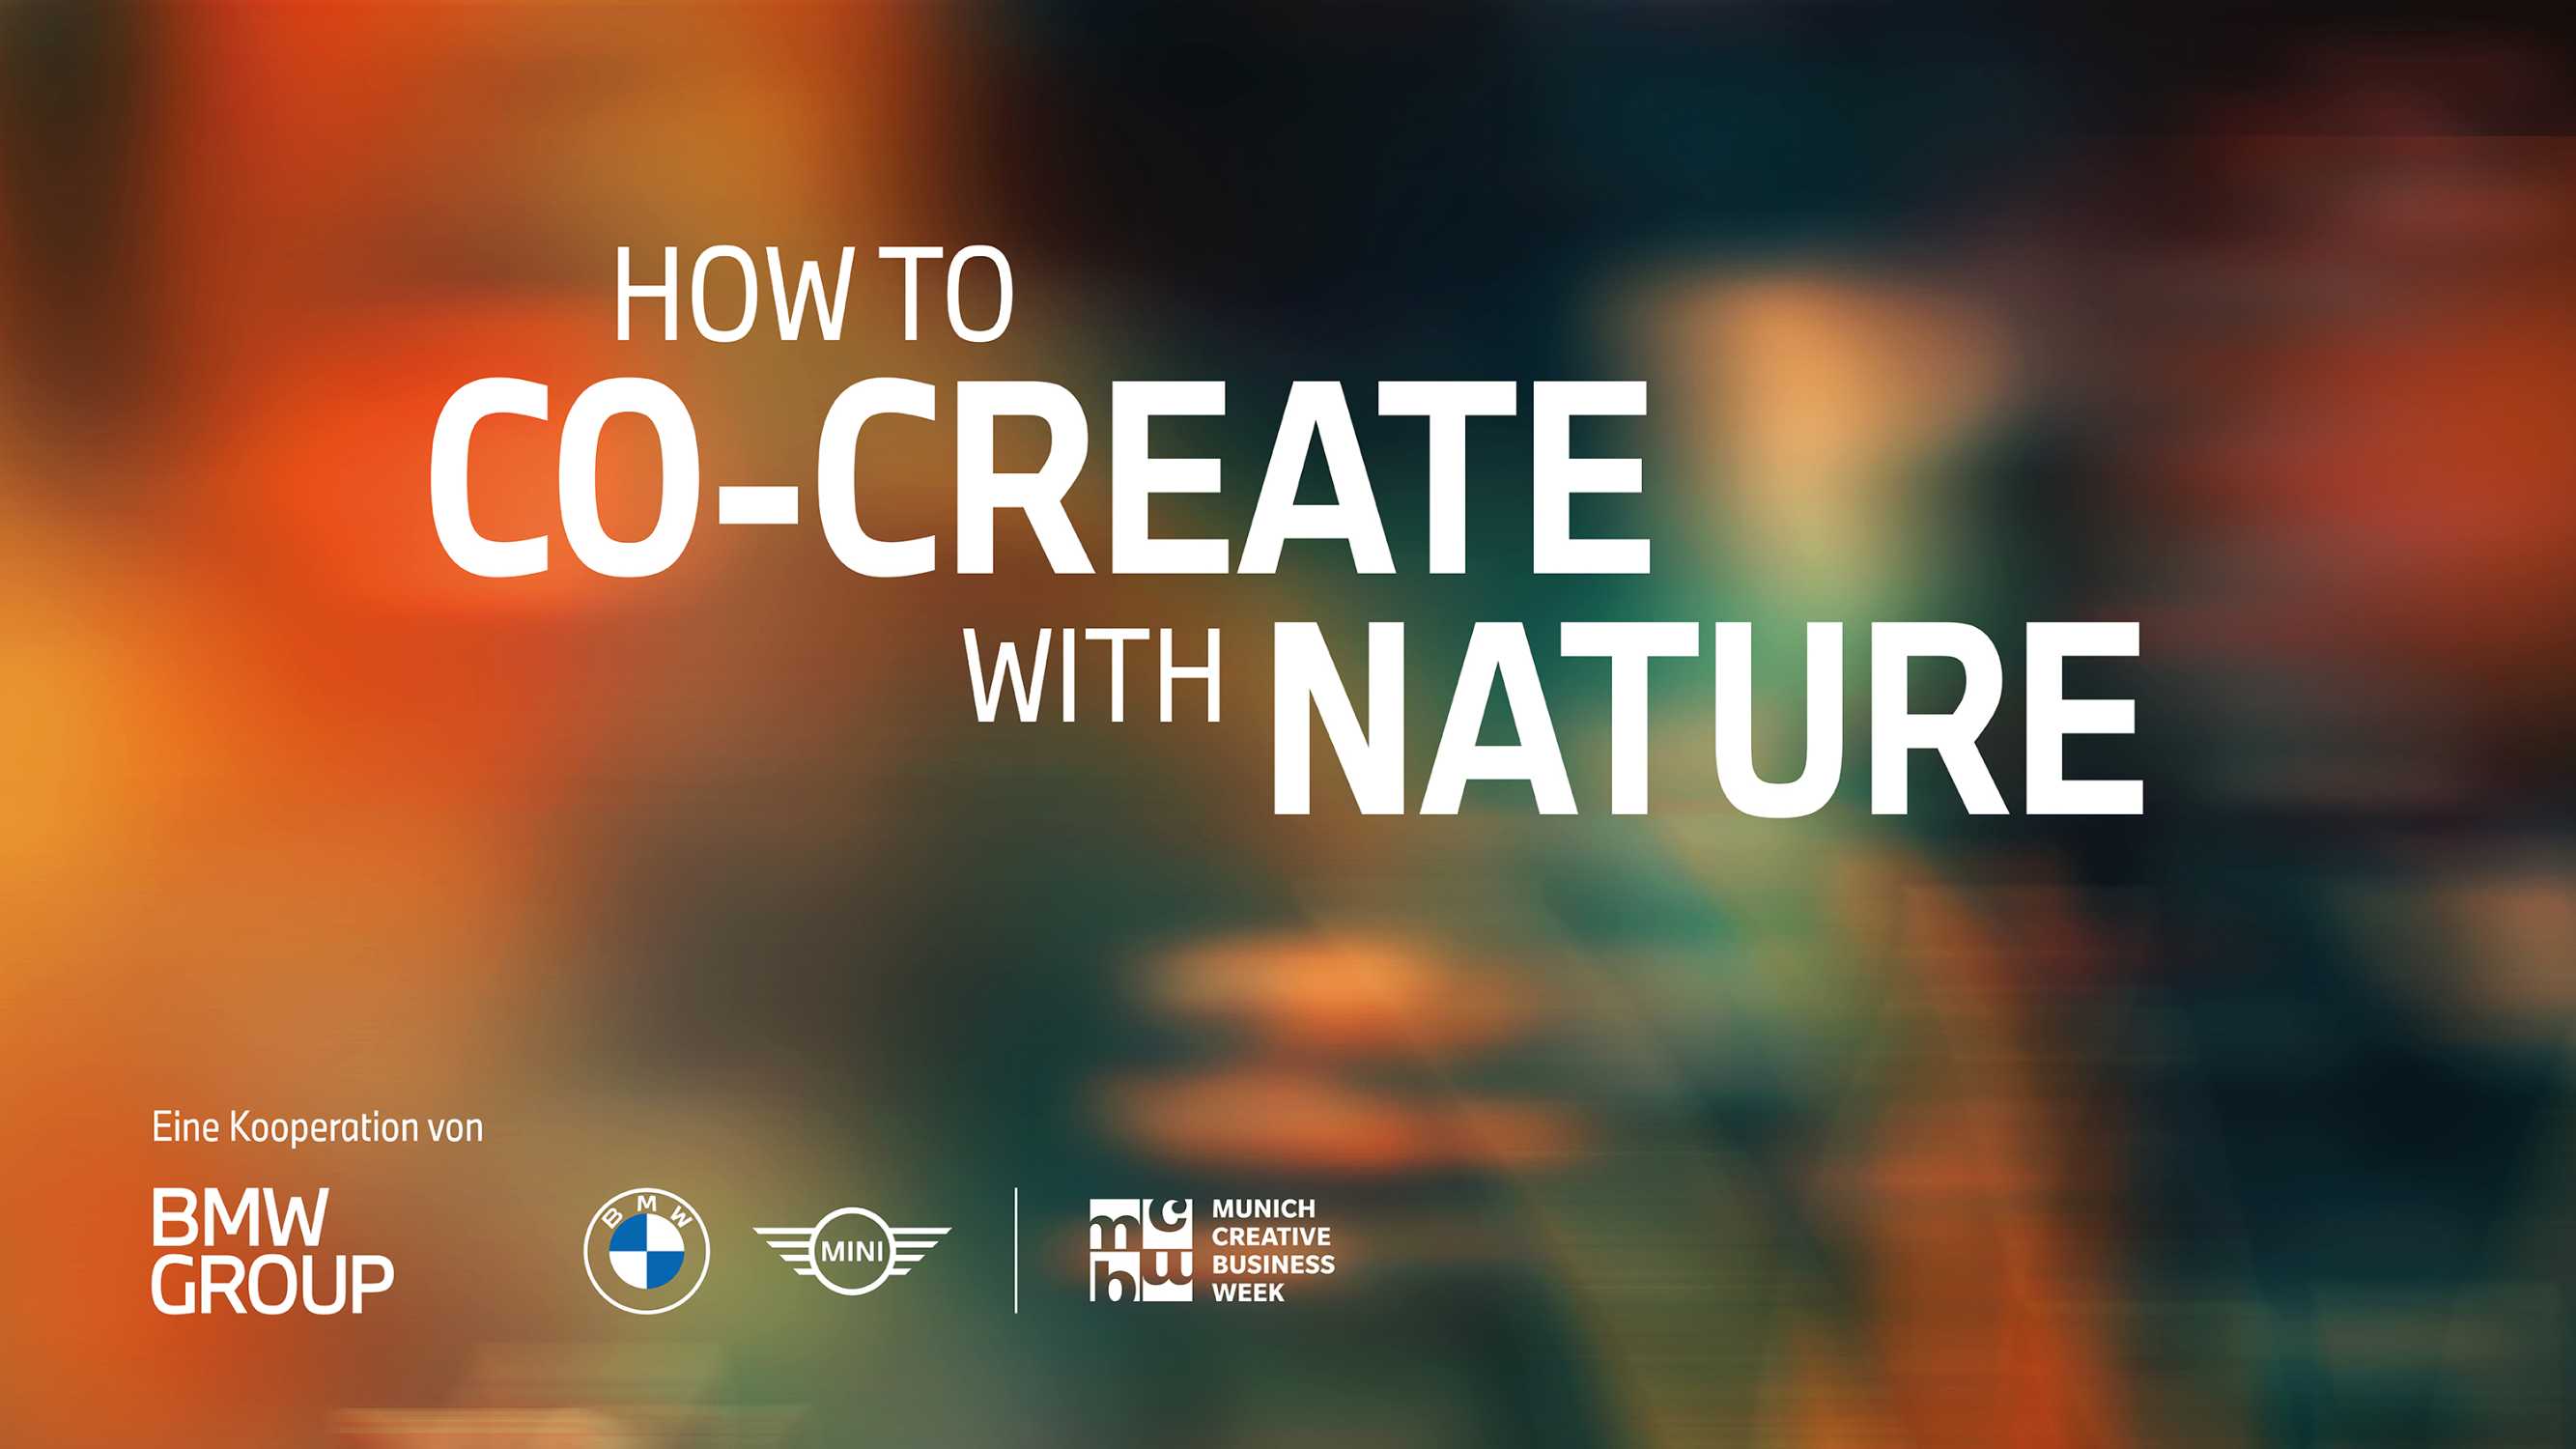 munich creative business week 2024 themed “How to co-create with nature”. BMW Group Design talks on aligning design and nature.